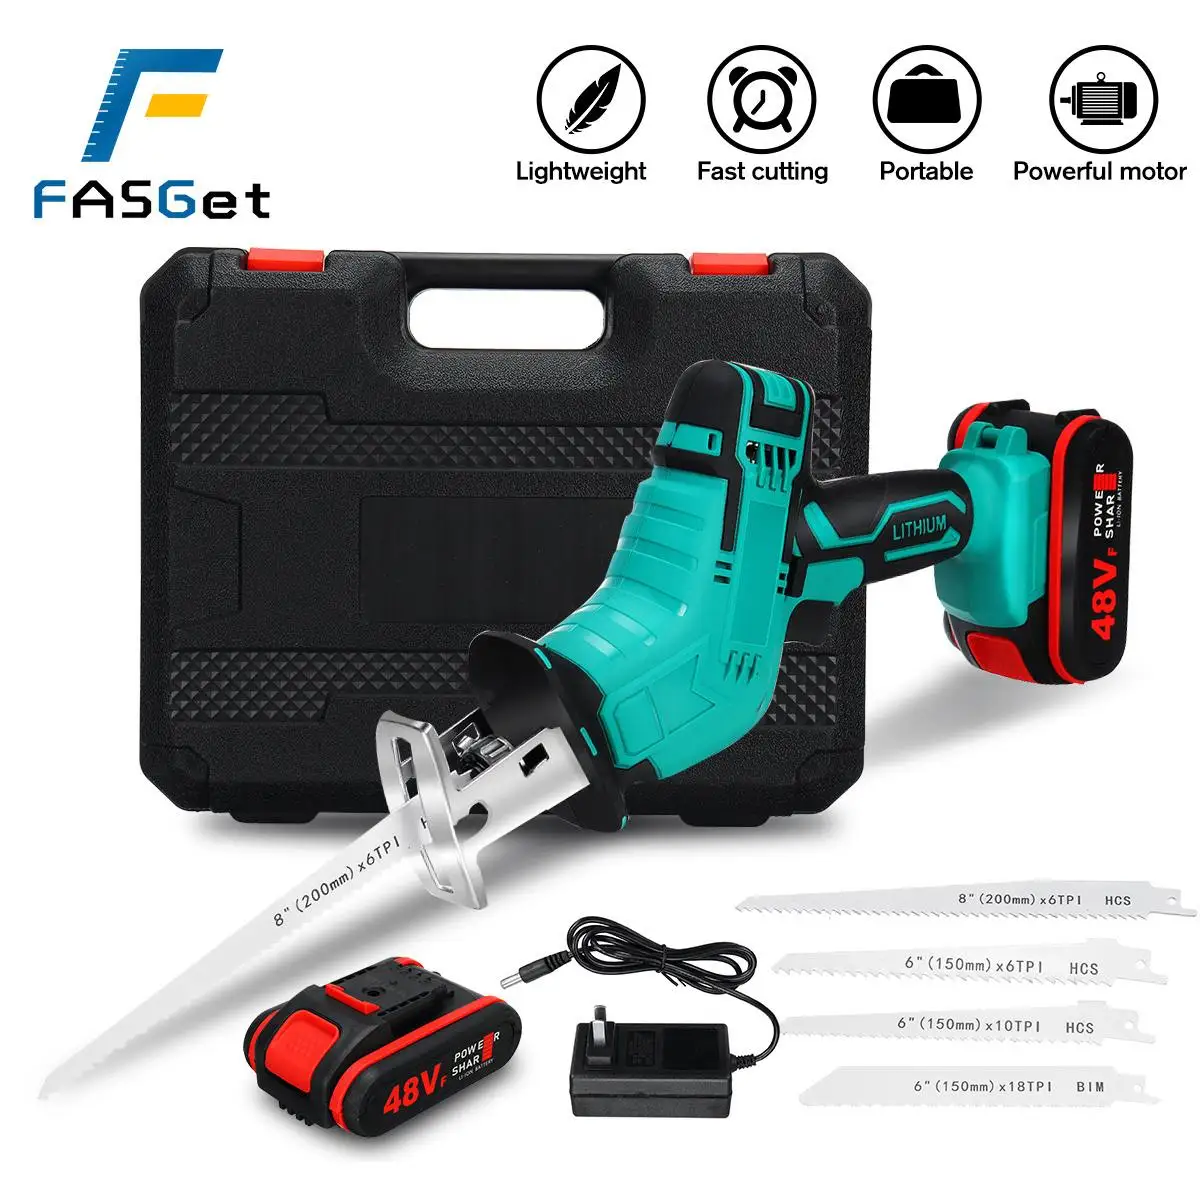 

48V Cordless Reciprocating Saw Adjustable Speed Chainsaw Wood Metal PVC Pipe Cutting Reciprocating Saw Power Tools w/4pcs blades